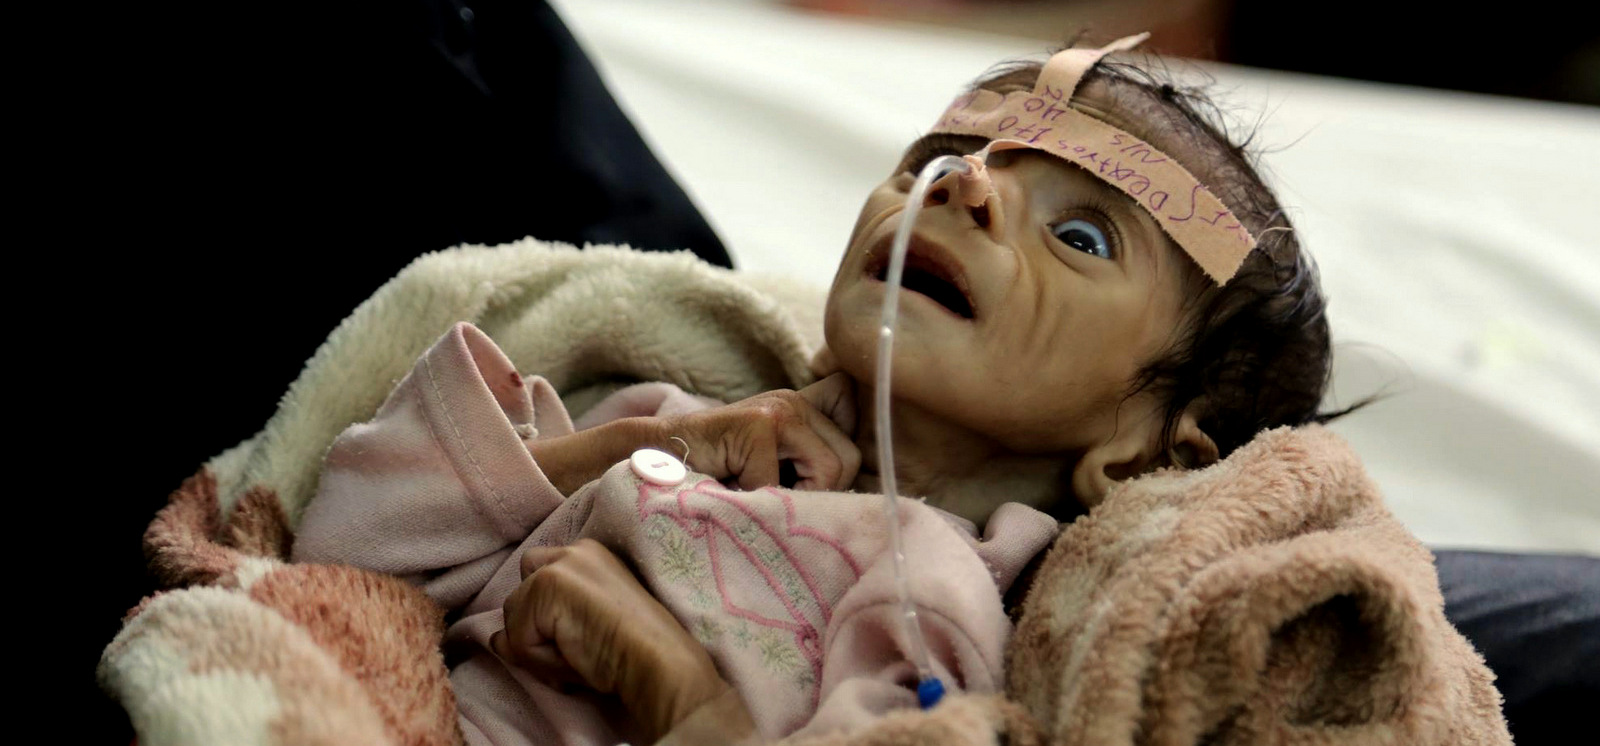 In this Tuesday, March 22, 2016 photo, infant Udai Faisal, who is suffering from acute malnutrition, is hospitalized at Al-Sabeen Hospital in Sanaa, Yemen. Udai died on March 24. Hunger has been the most horrific consequence of Yemen’s conflict and has spiraled since Saudi Arabia and its allies, backed by the U.S., launched a campaign of airstrikes and a naval blockade a year ago. (AP Photo/Maad al-Zikry)